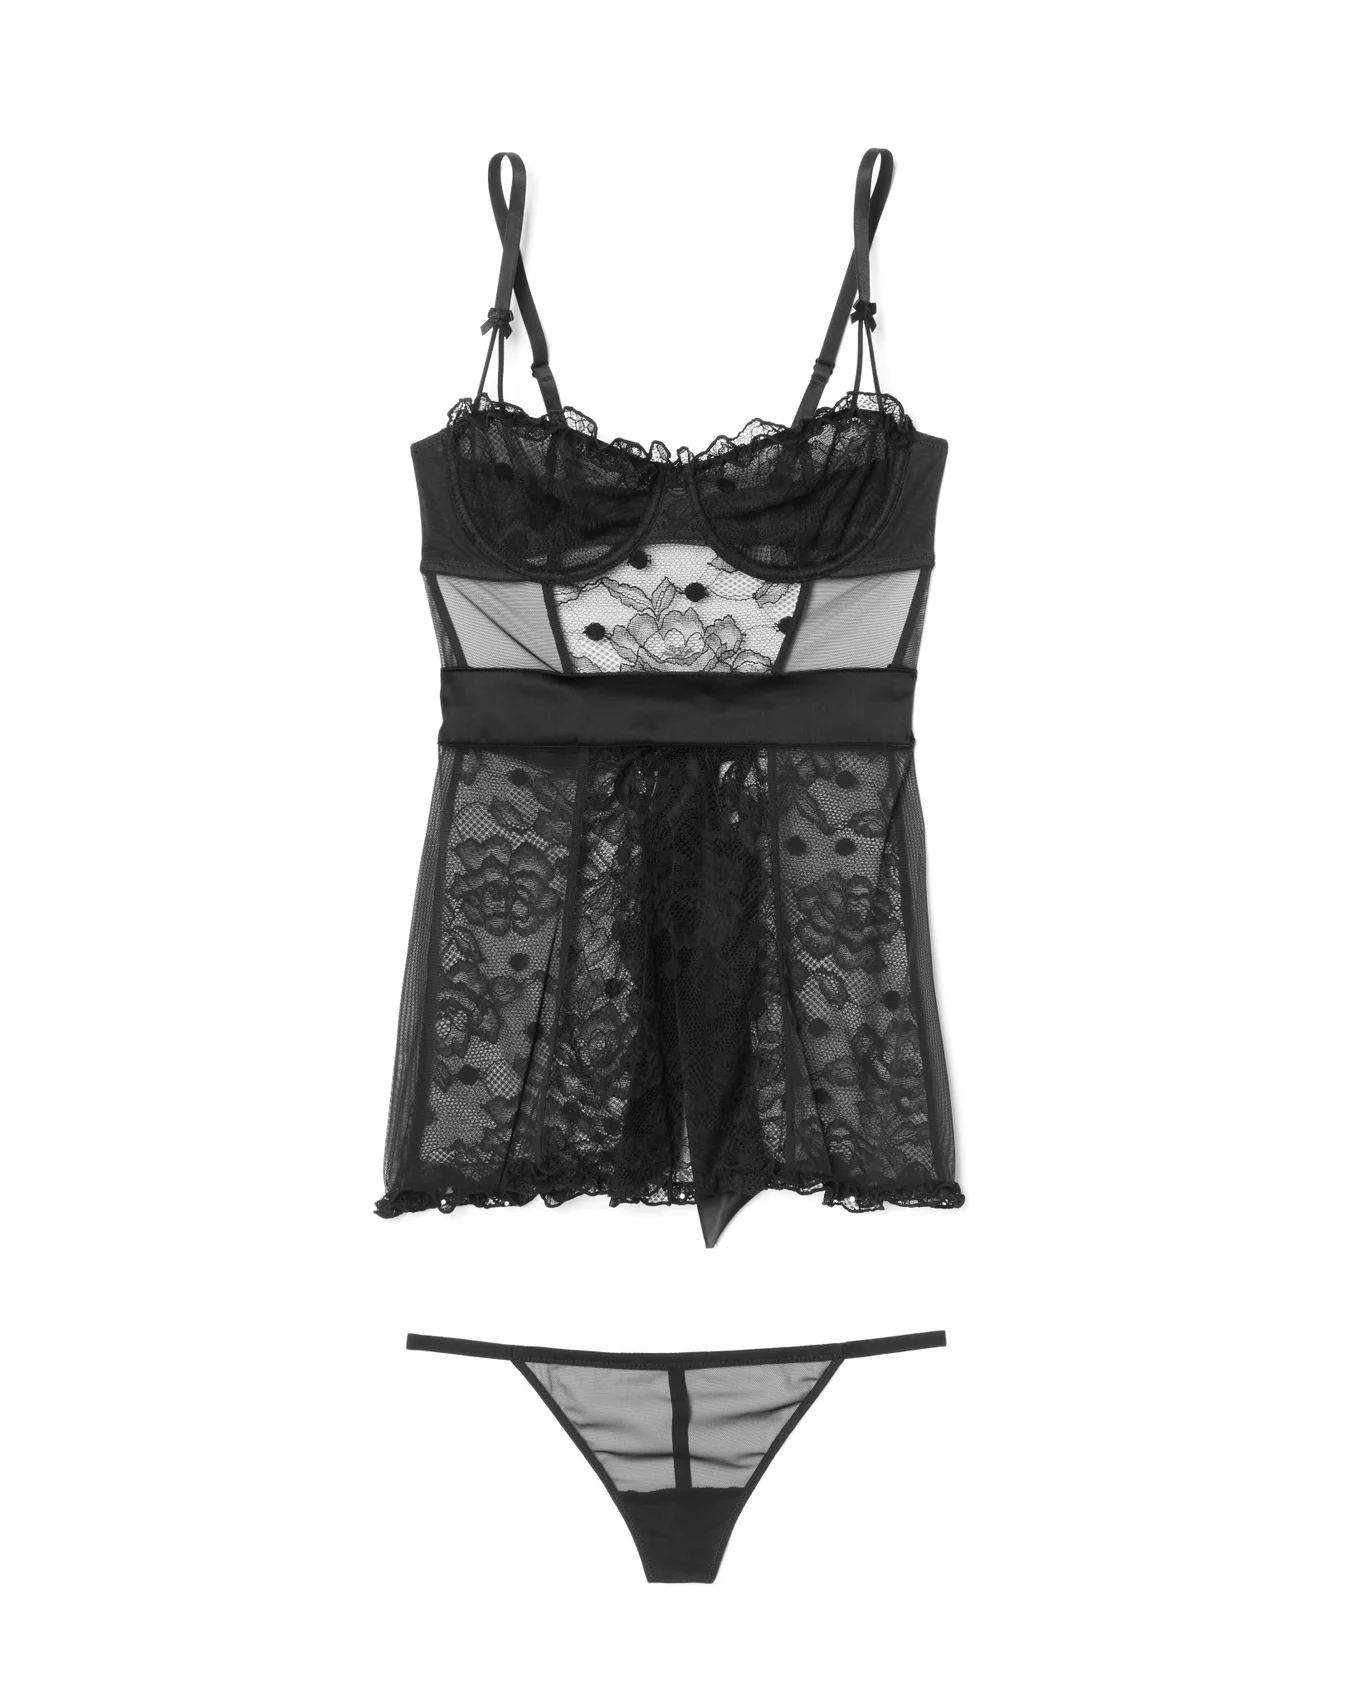 Black Color Babydoll. Lace Women`s Underwear on the Whitw B Stock